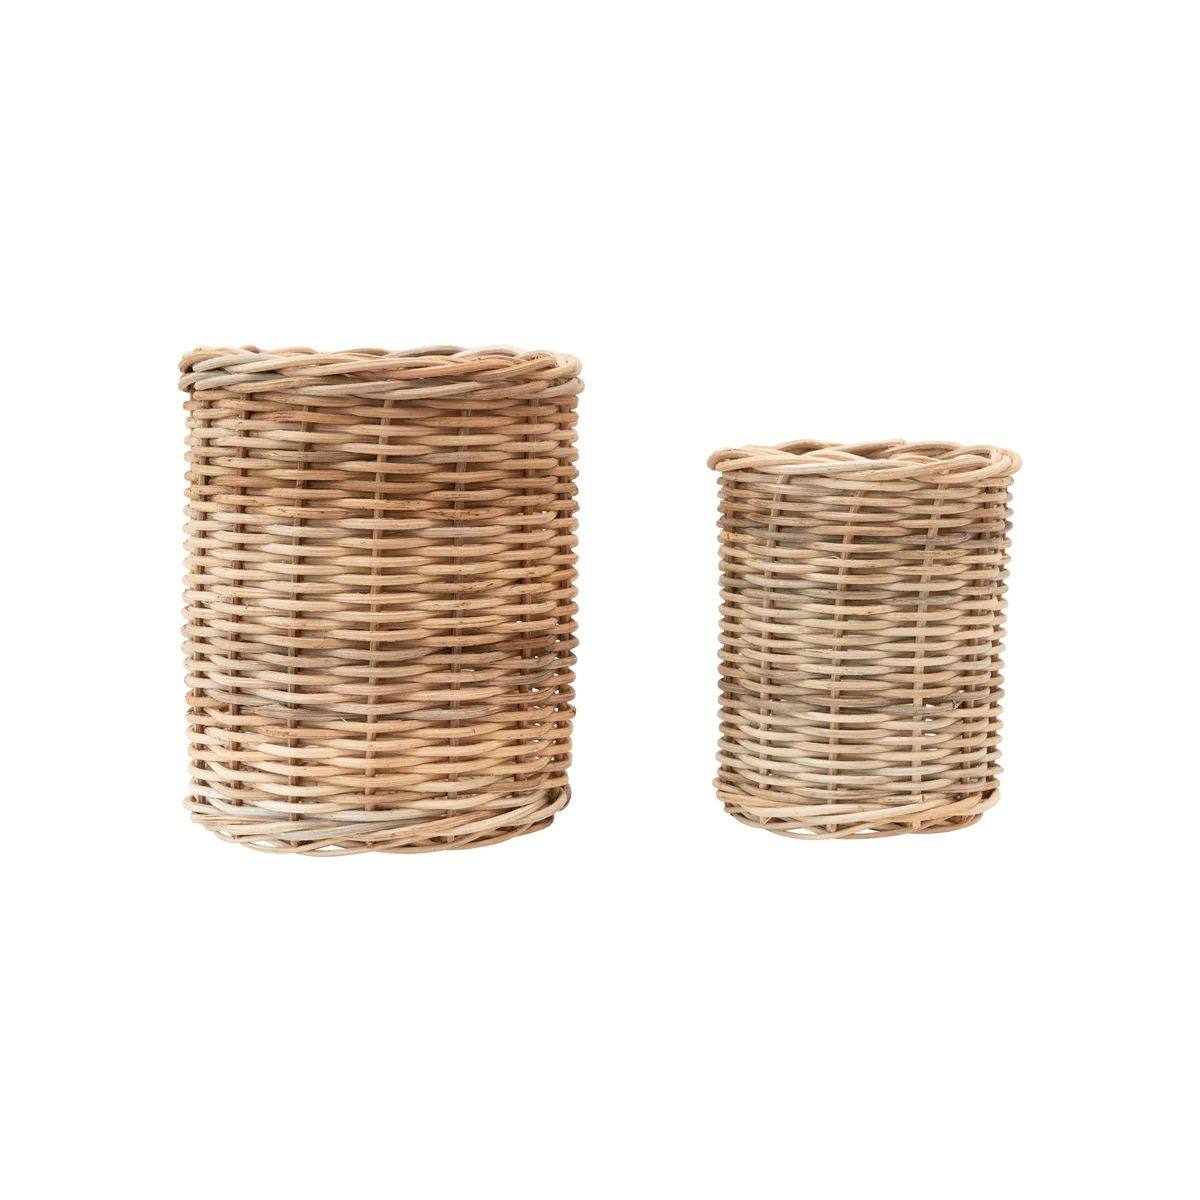 Handwoven Basket Pair | Tuesday Made